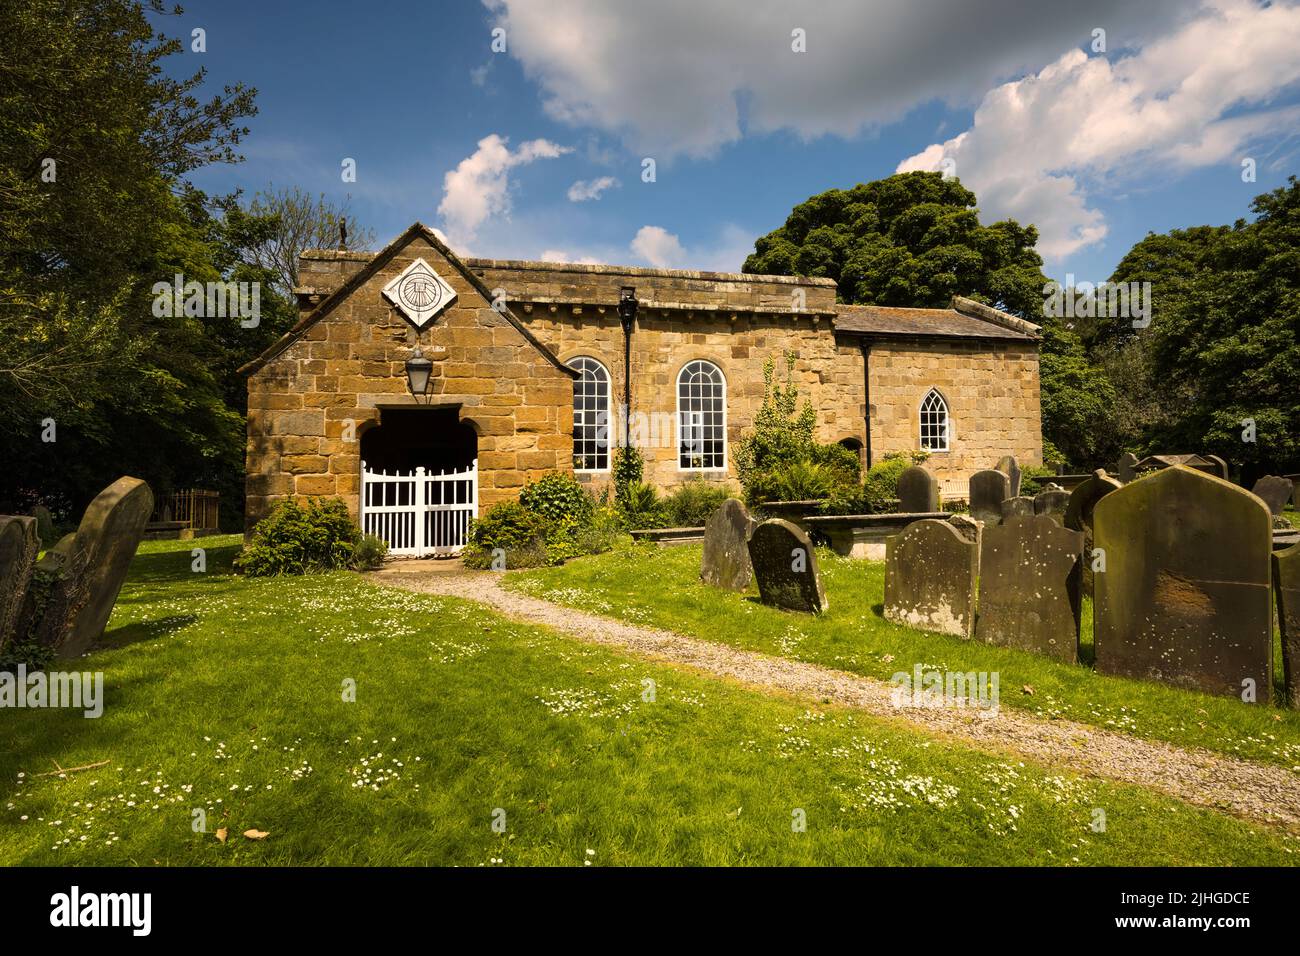 All Saints Church, Great Ayton dating from 12th century built of local sandstone. The church grounds contain the family grave of Captain James Cook. Stock Photo